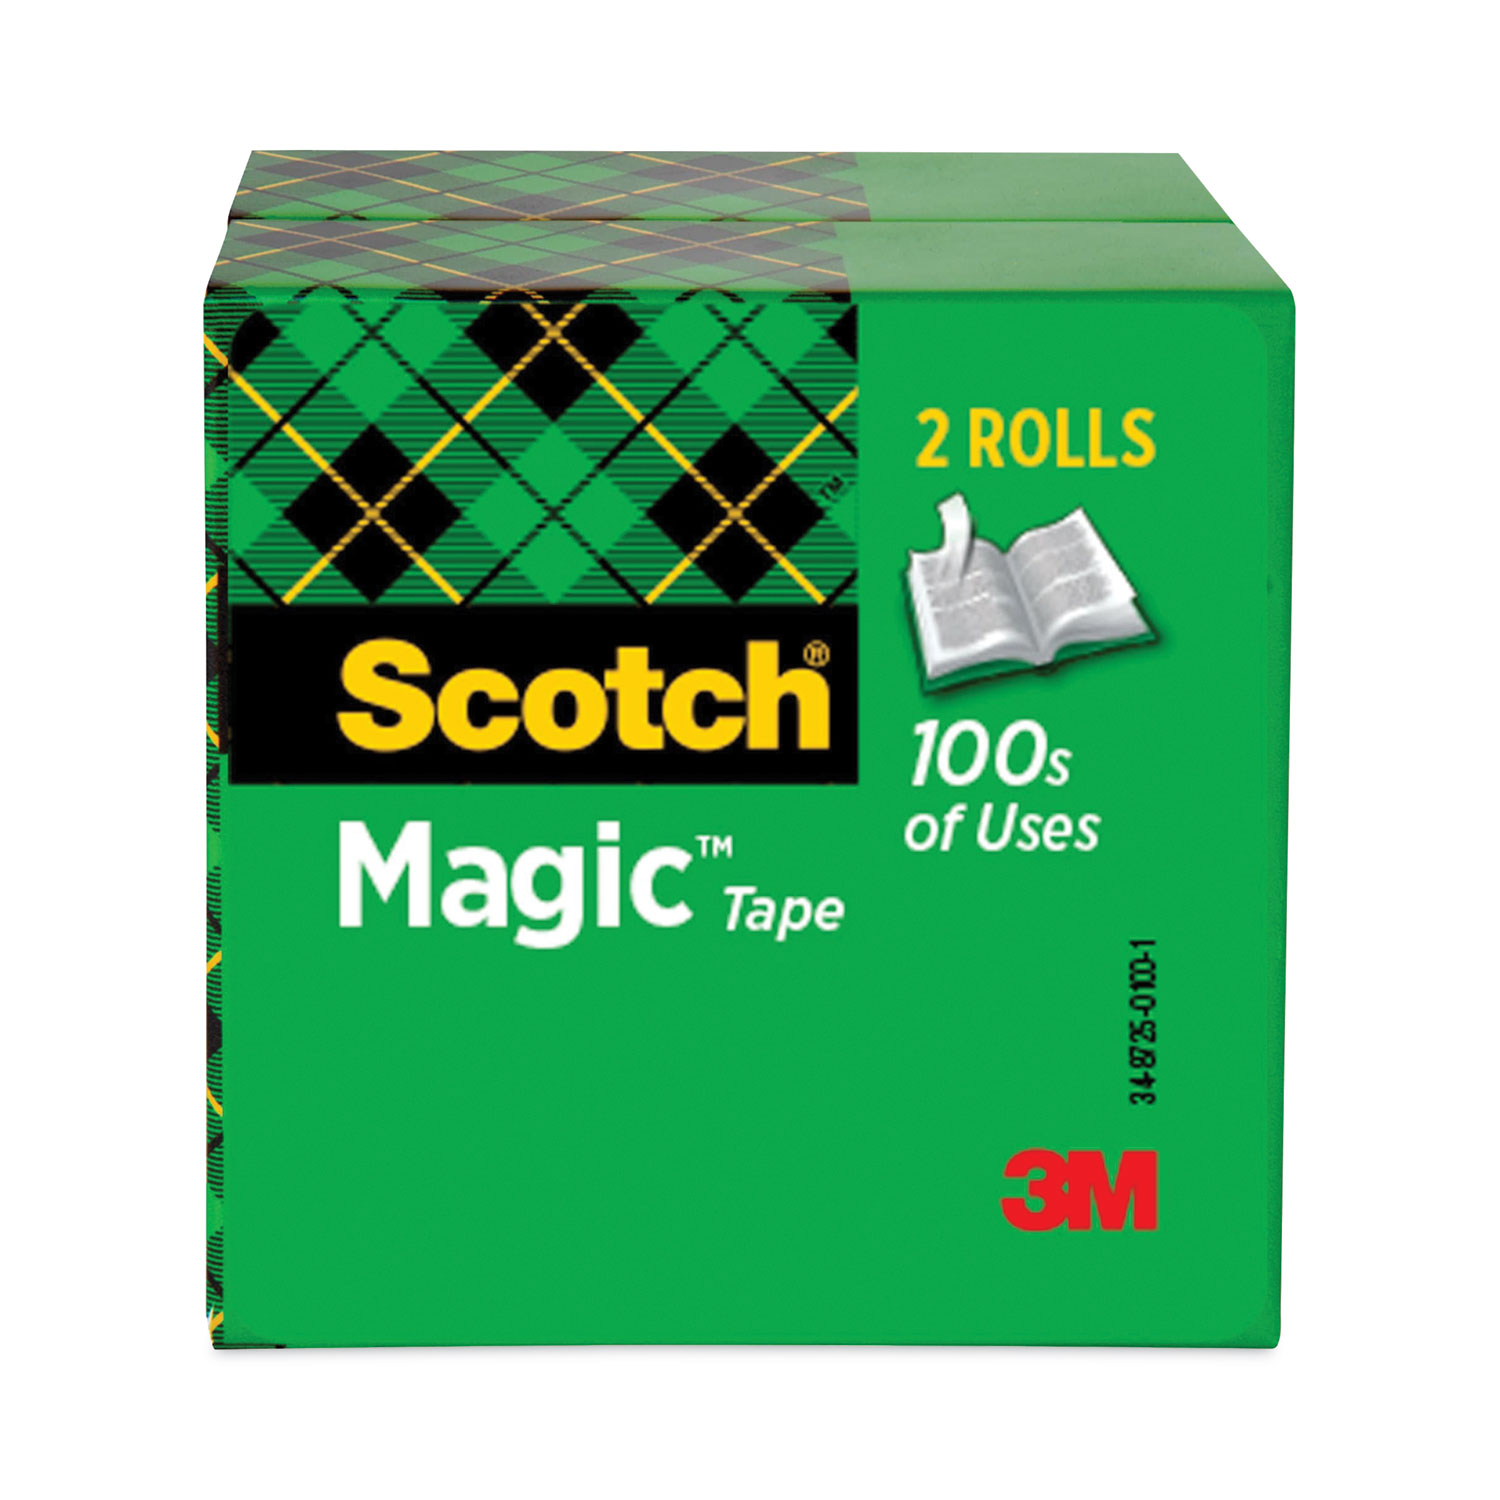 Magic Tape Refill, 3 Core, 0.75 x 72 yds, Clear, 2/Pack